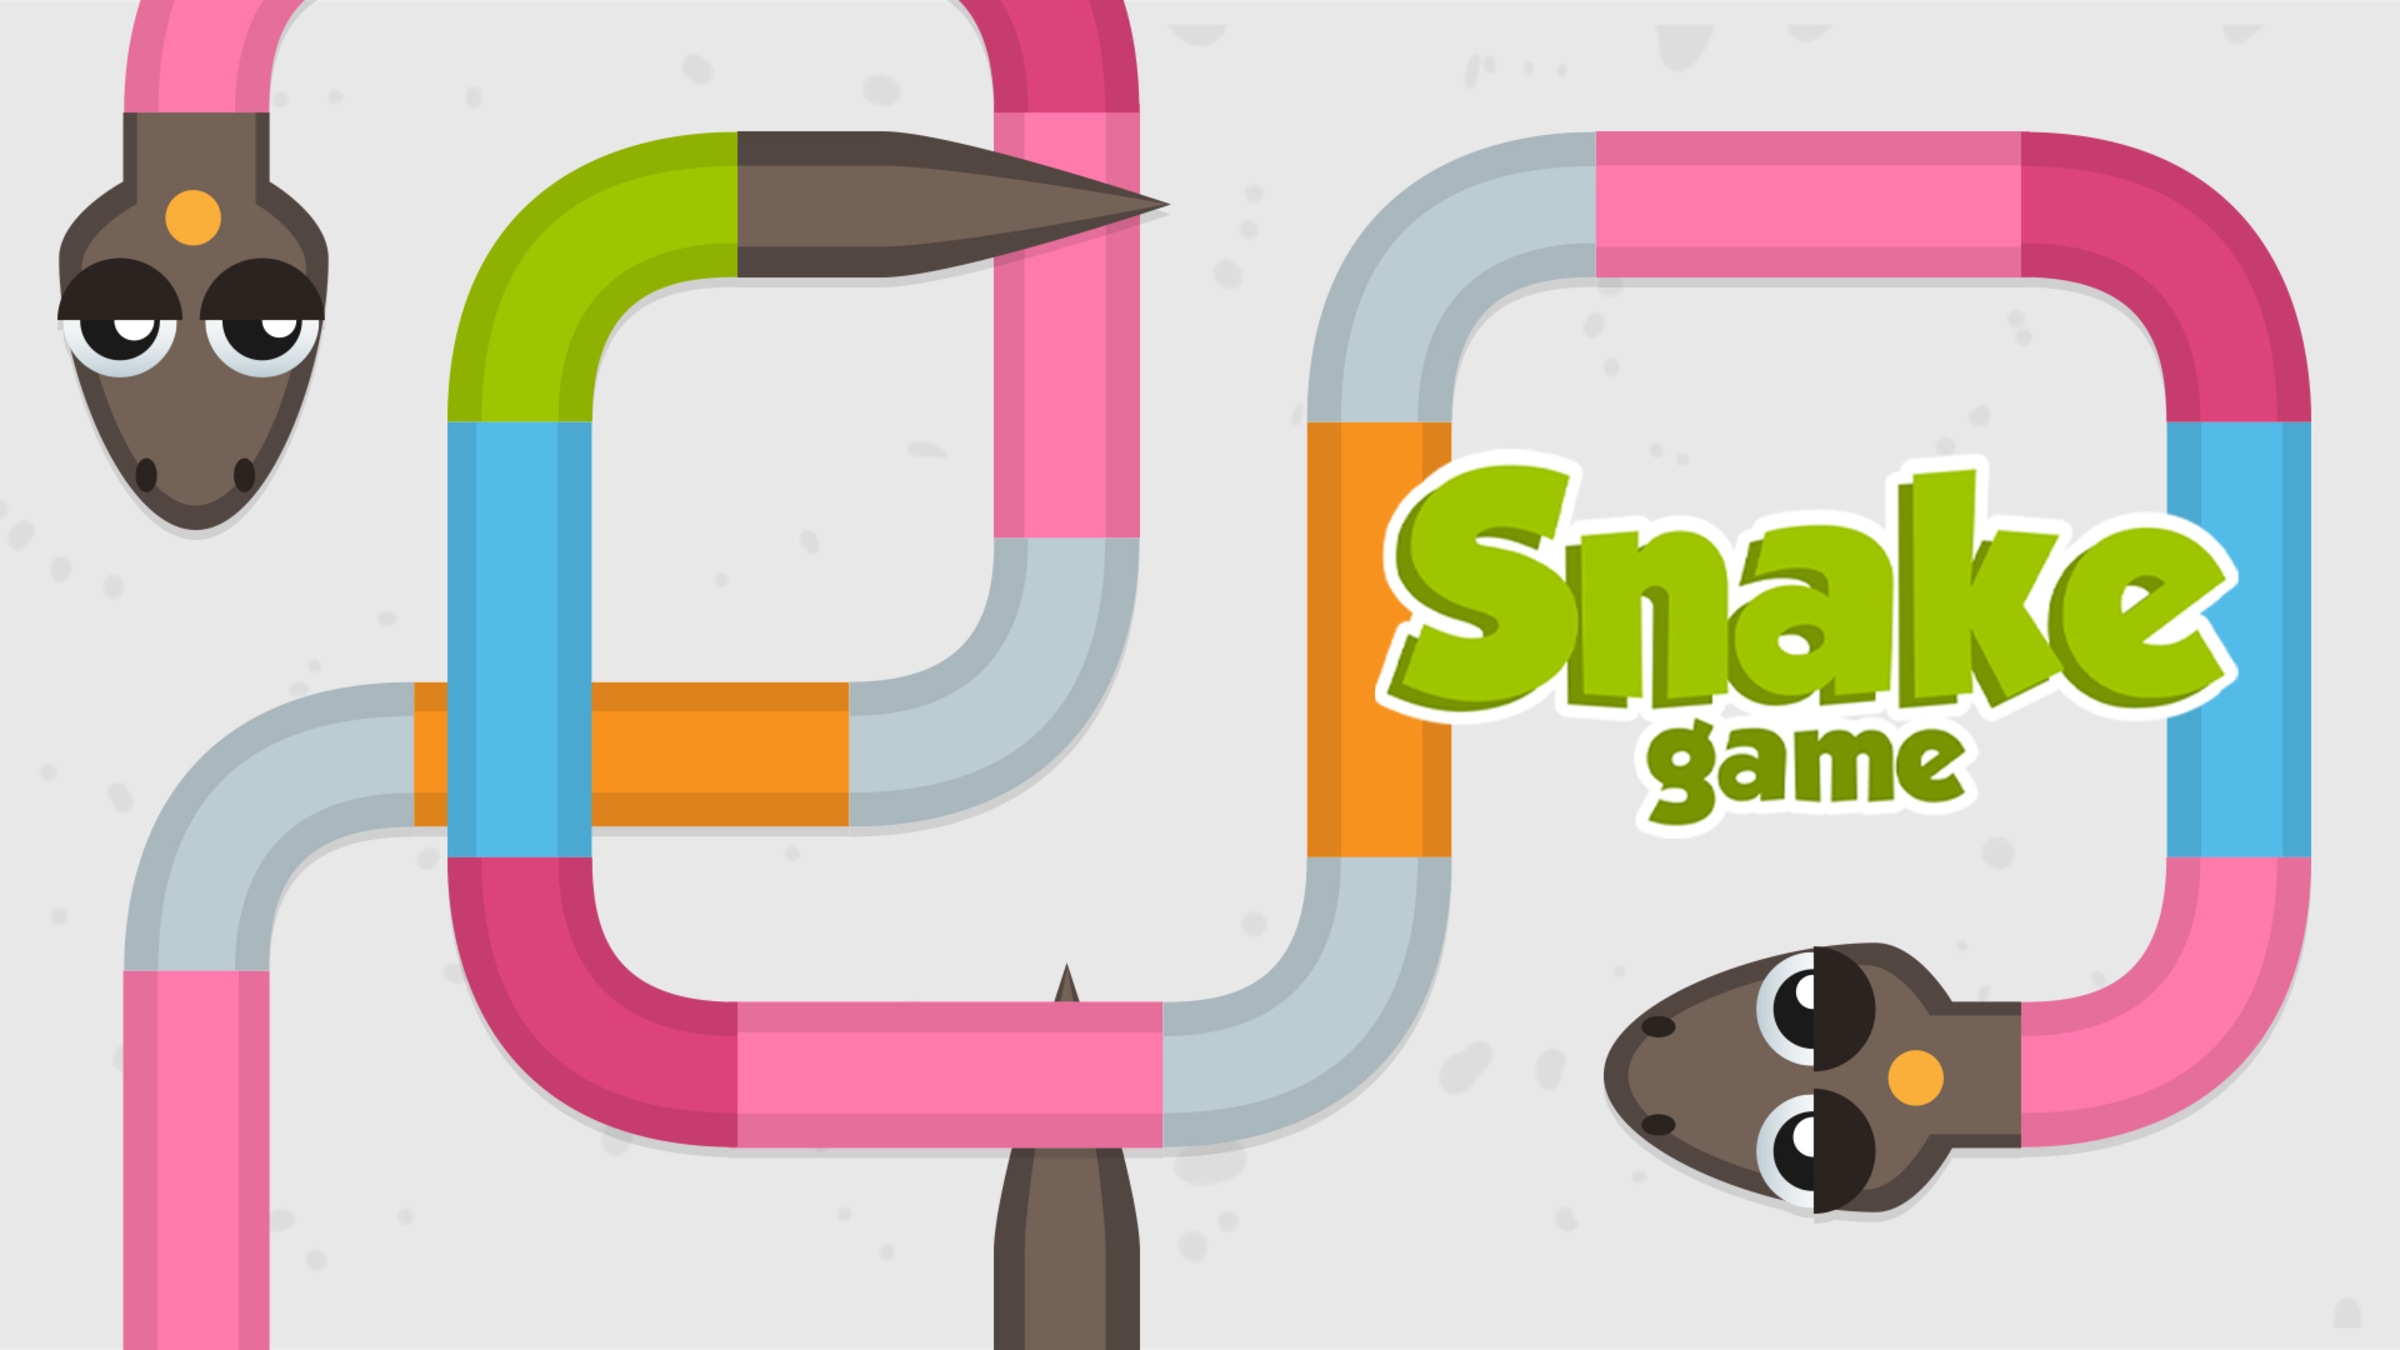 Is Snake game addictive?